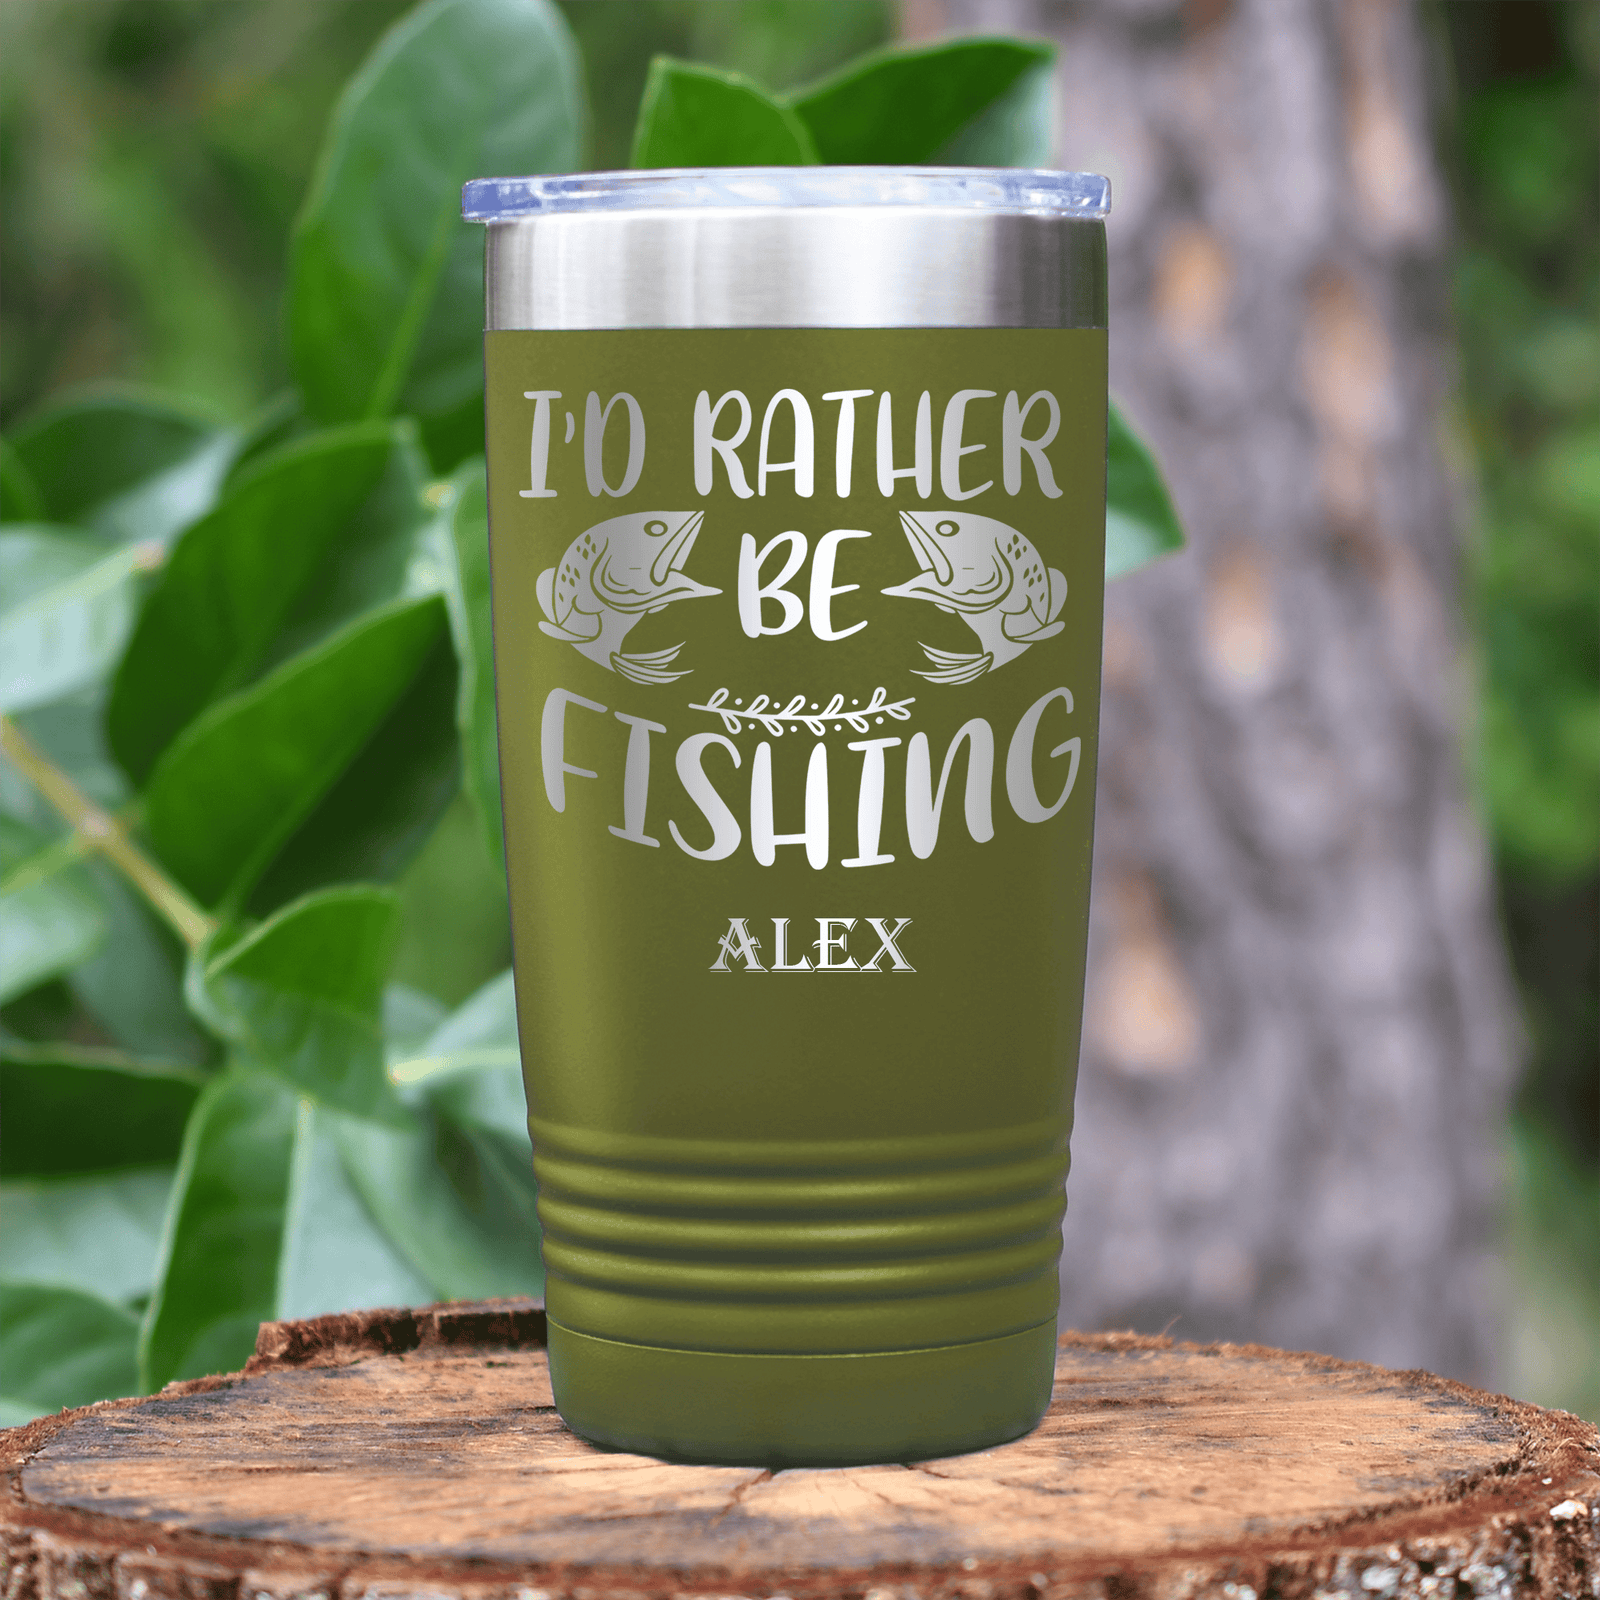 Great Choice Products Fishing Gifts For Men, Fishing Gifts, Funny Fishing  Gifts For Boys, Fishing Gifts For Women Unique,Fishing Gift, Best Gi…